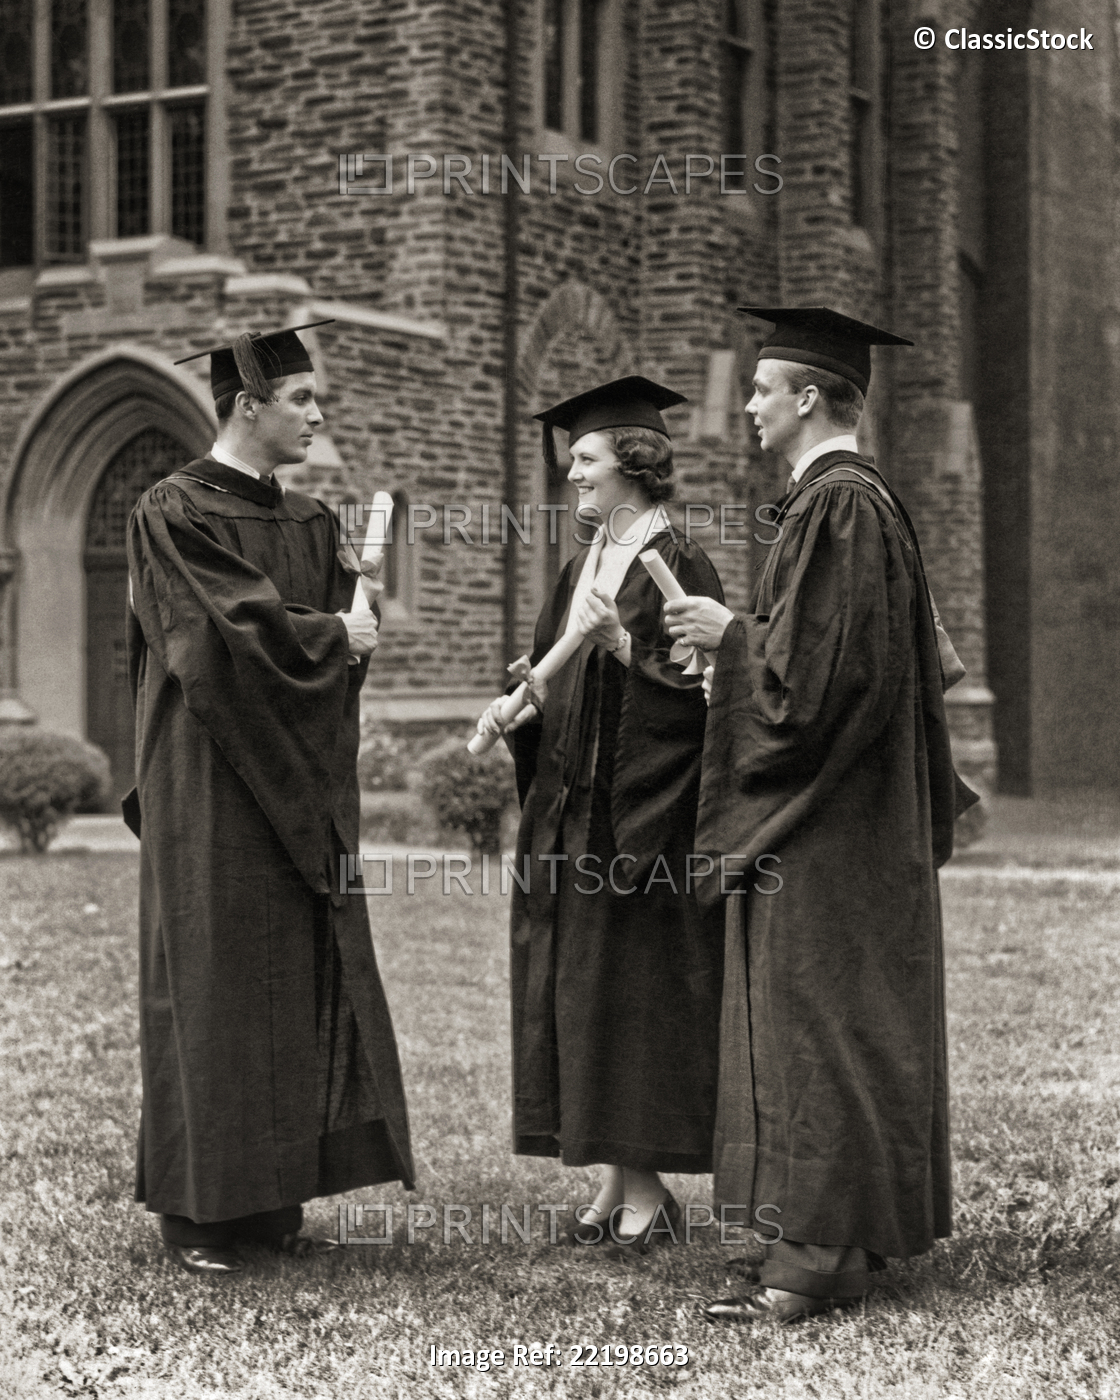 1930s 1940s GROUP COLLEGE GRADUATES ONE WOMAN TWO MEN WEARING MORTARBOARD CAPS ...